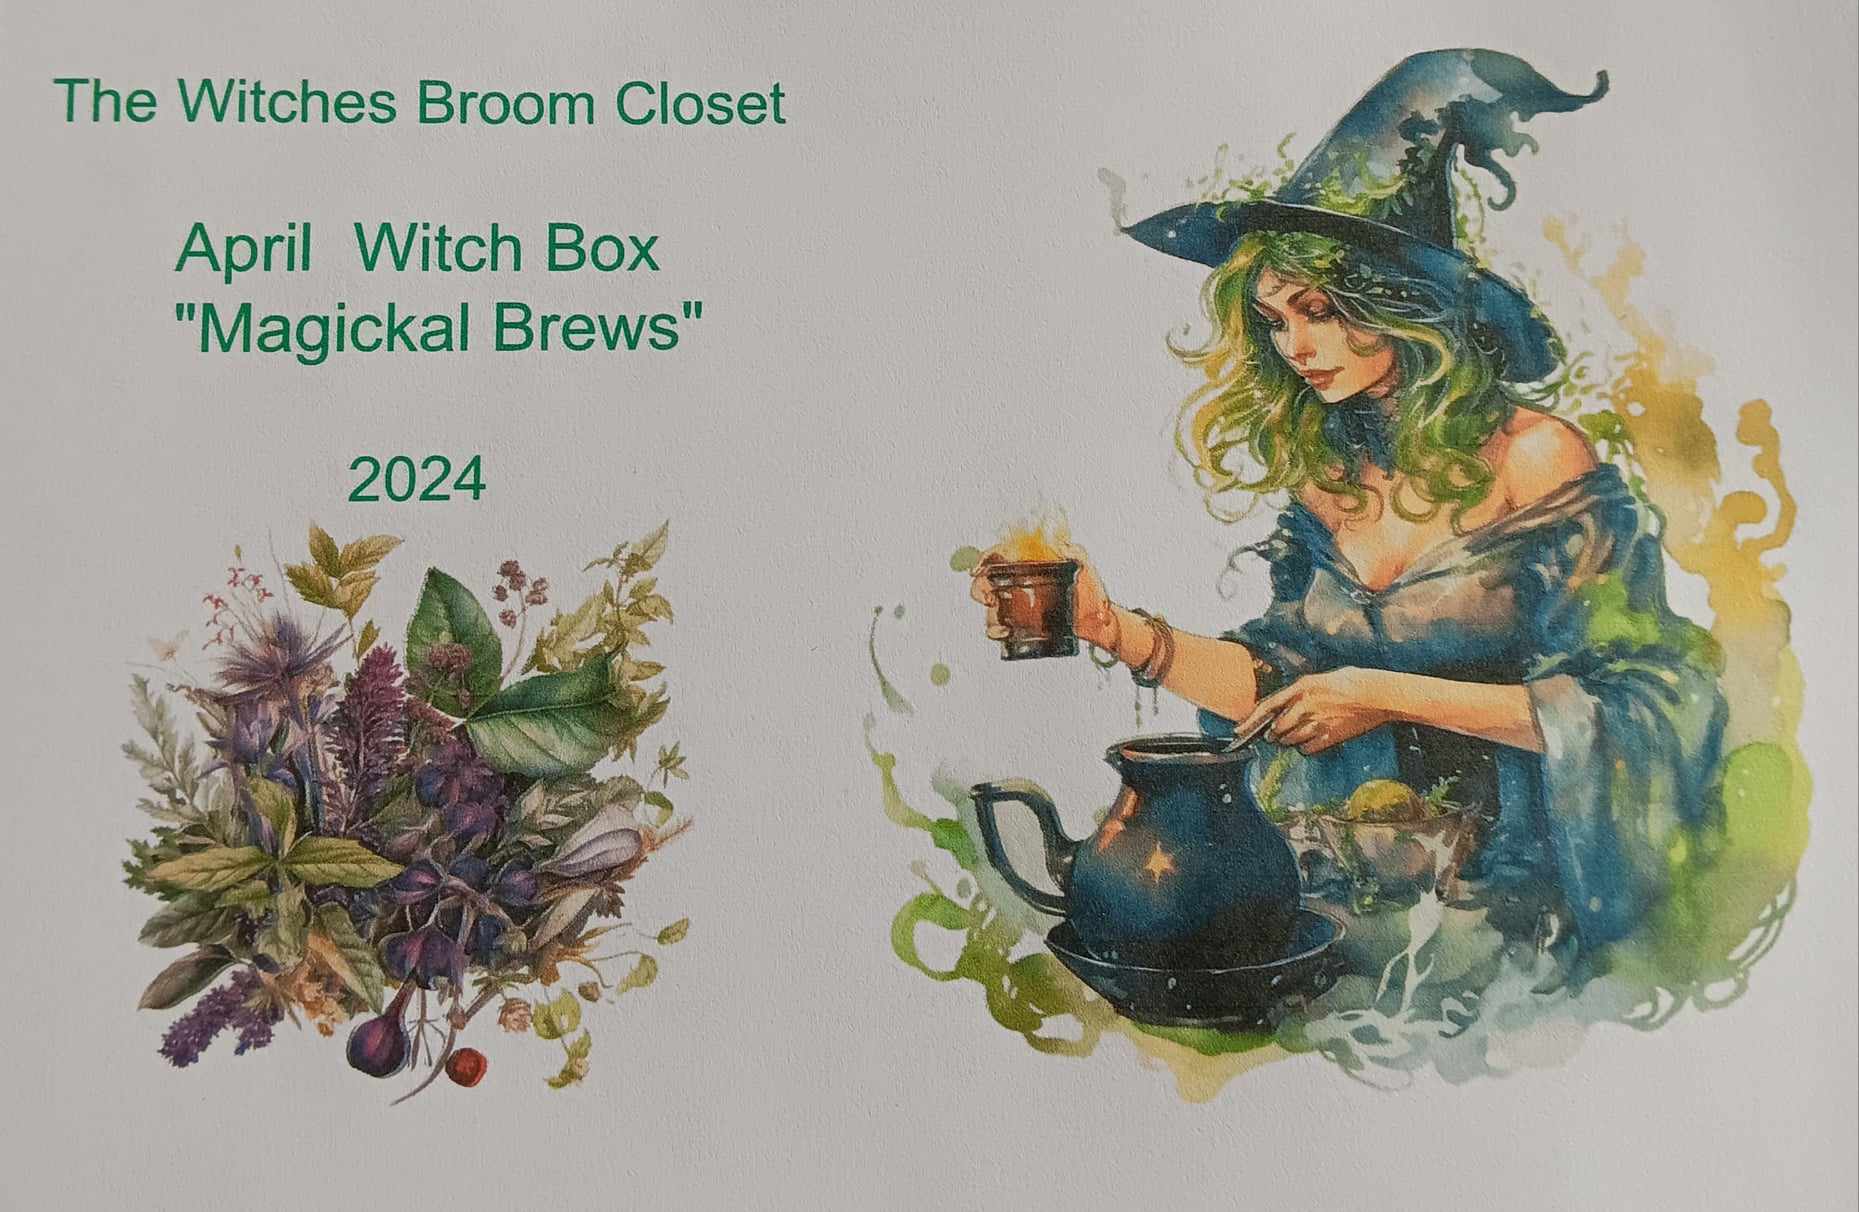 The Witches Broom Closet Witch Box *PRE-ORDER* (April 2024) Magickal Brews Witch Box